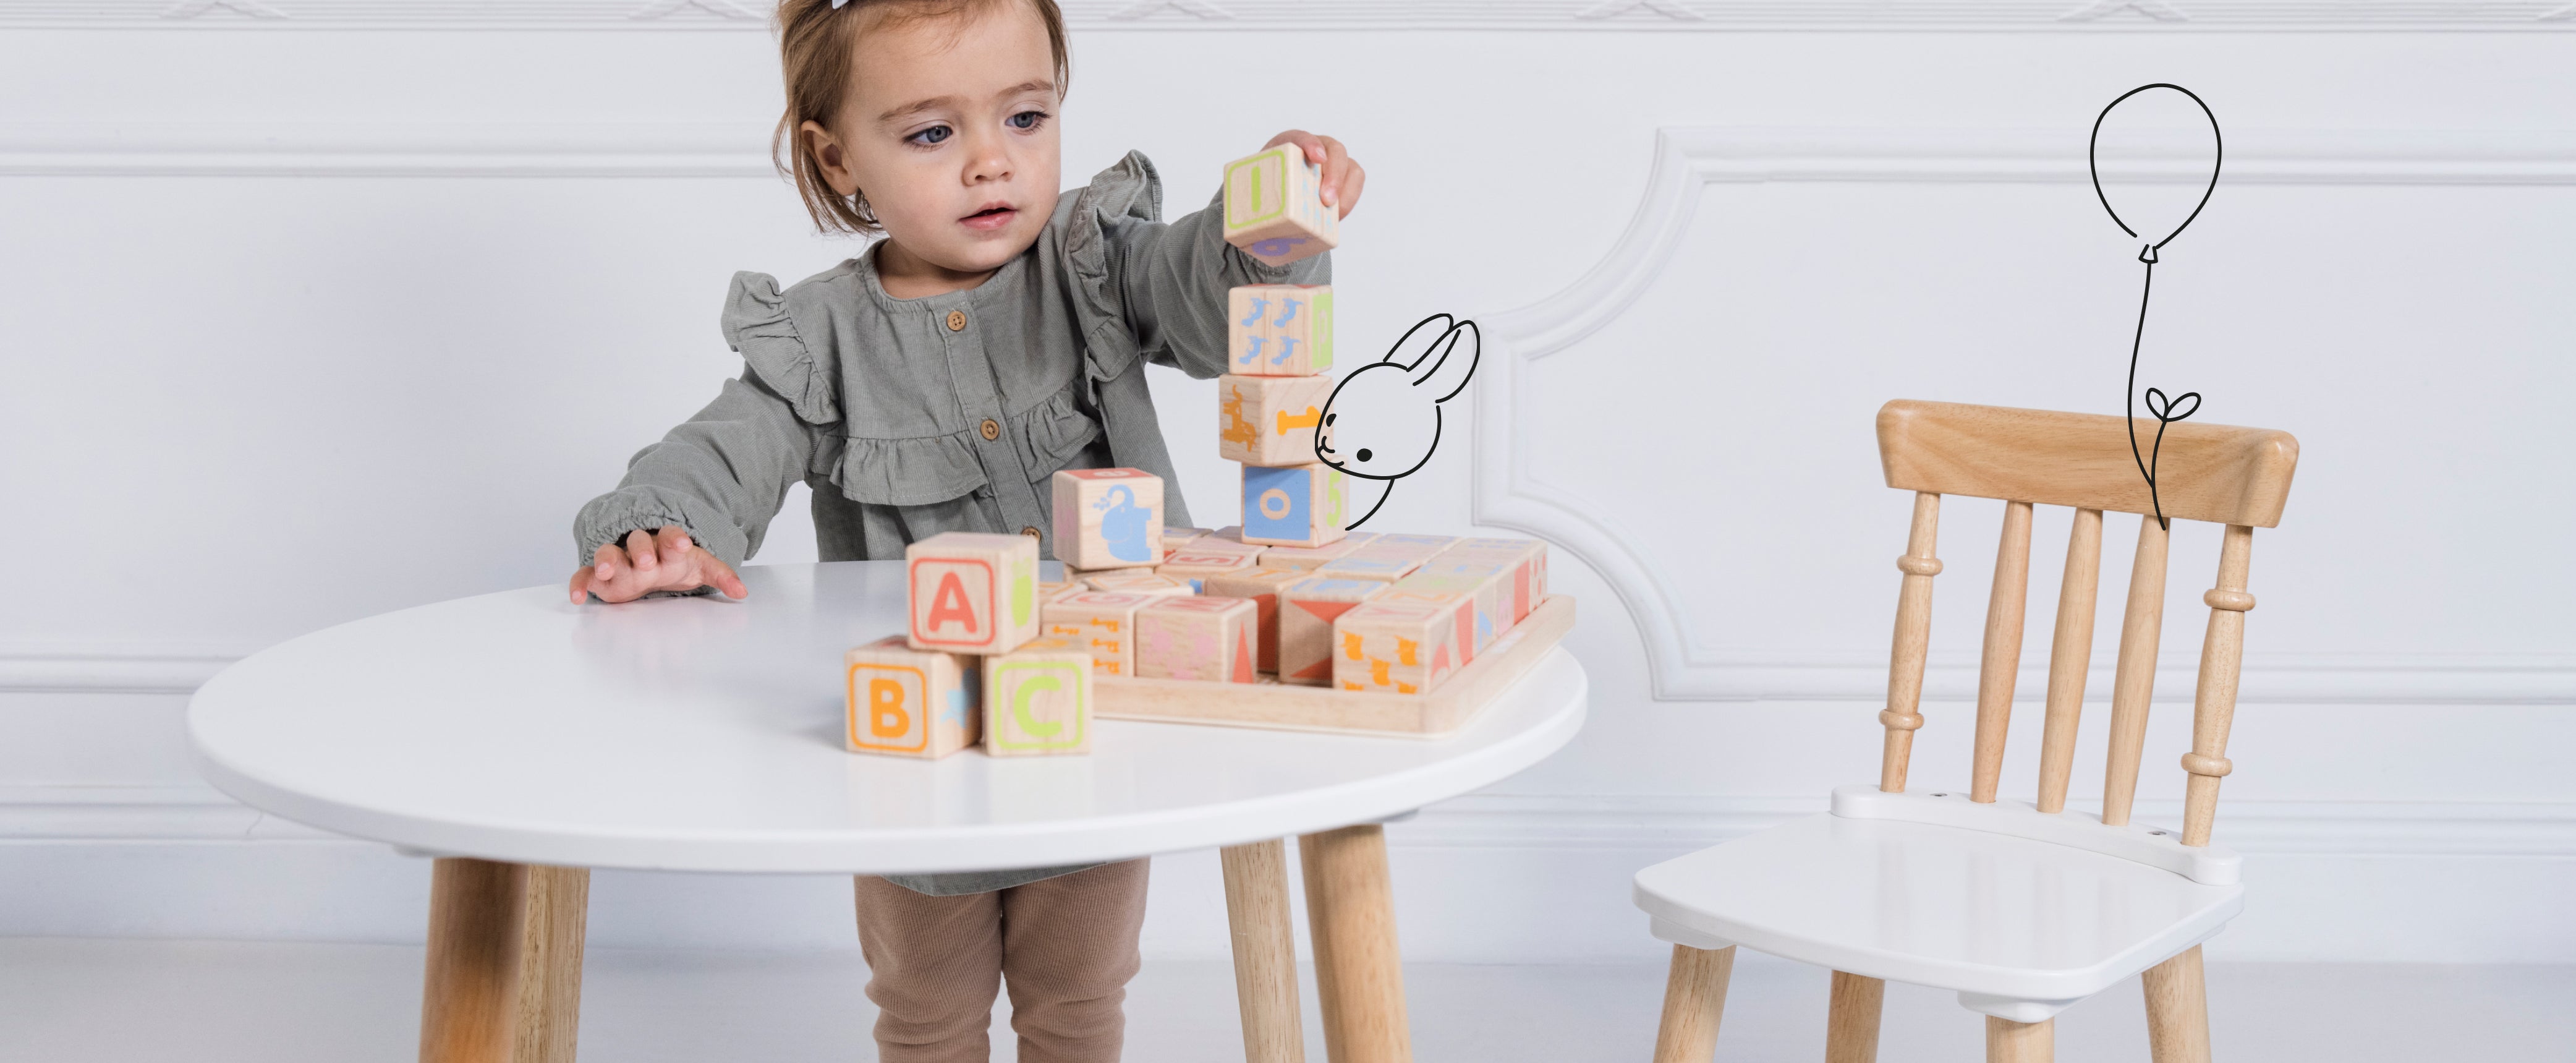 Buyers Guide to the Best Toys and Gifts for One Year Olds